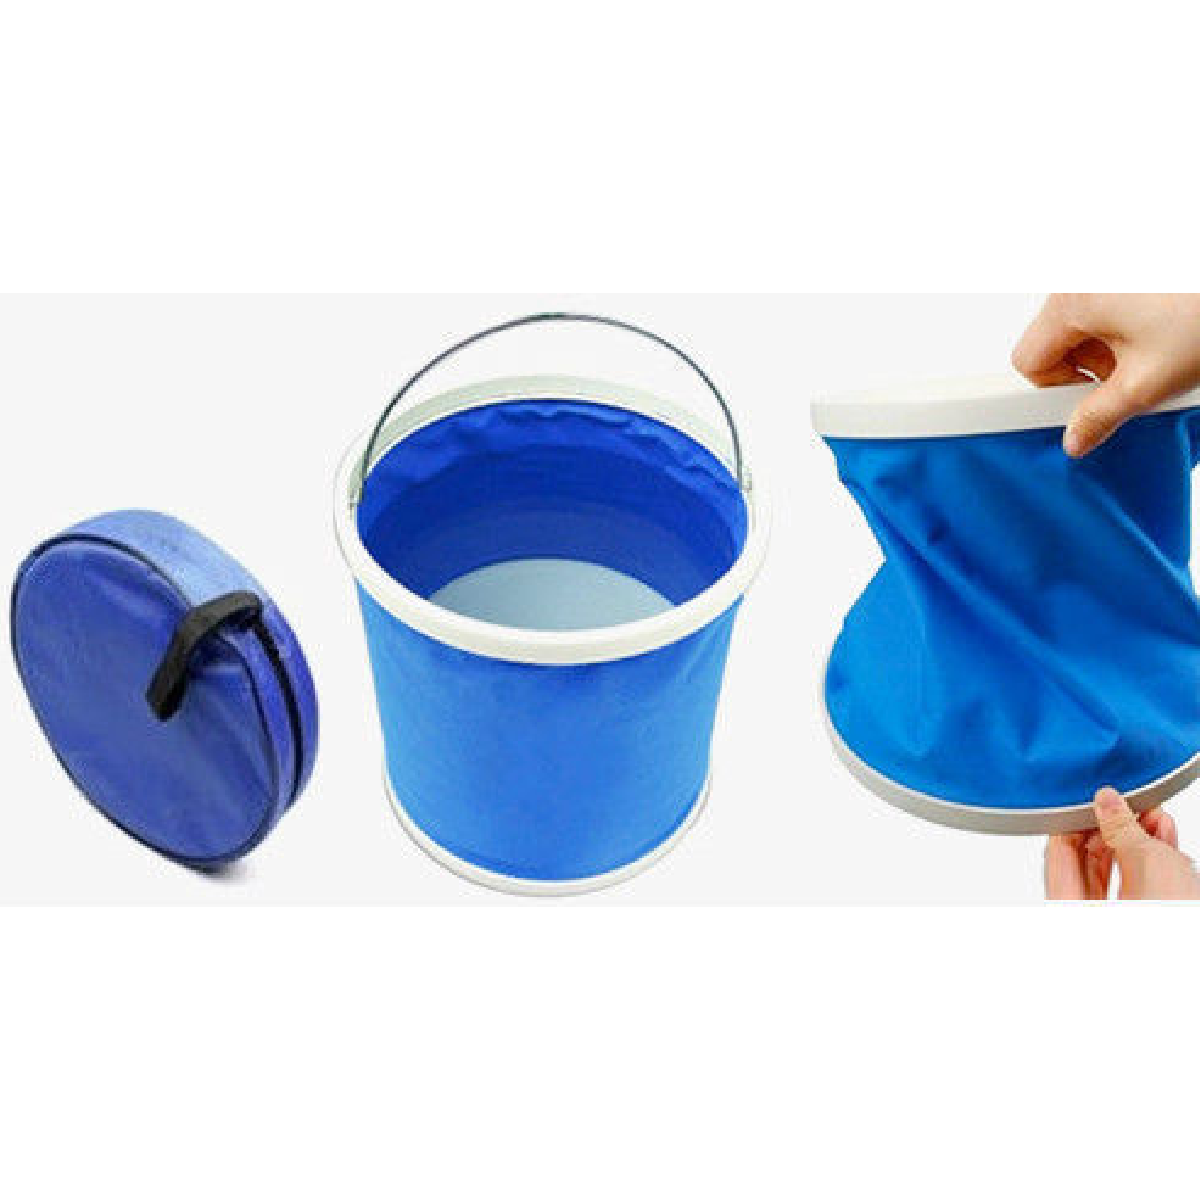 5 Litre COLLAPSIBLE FOLDING BUCKET with LID caravan camping